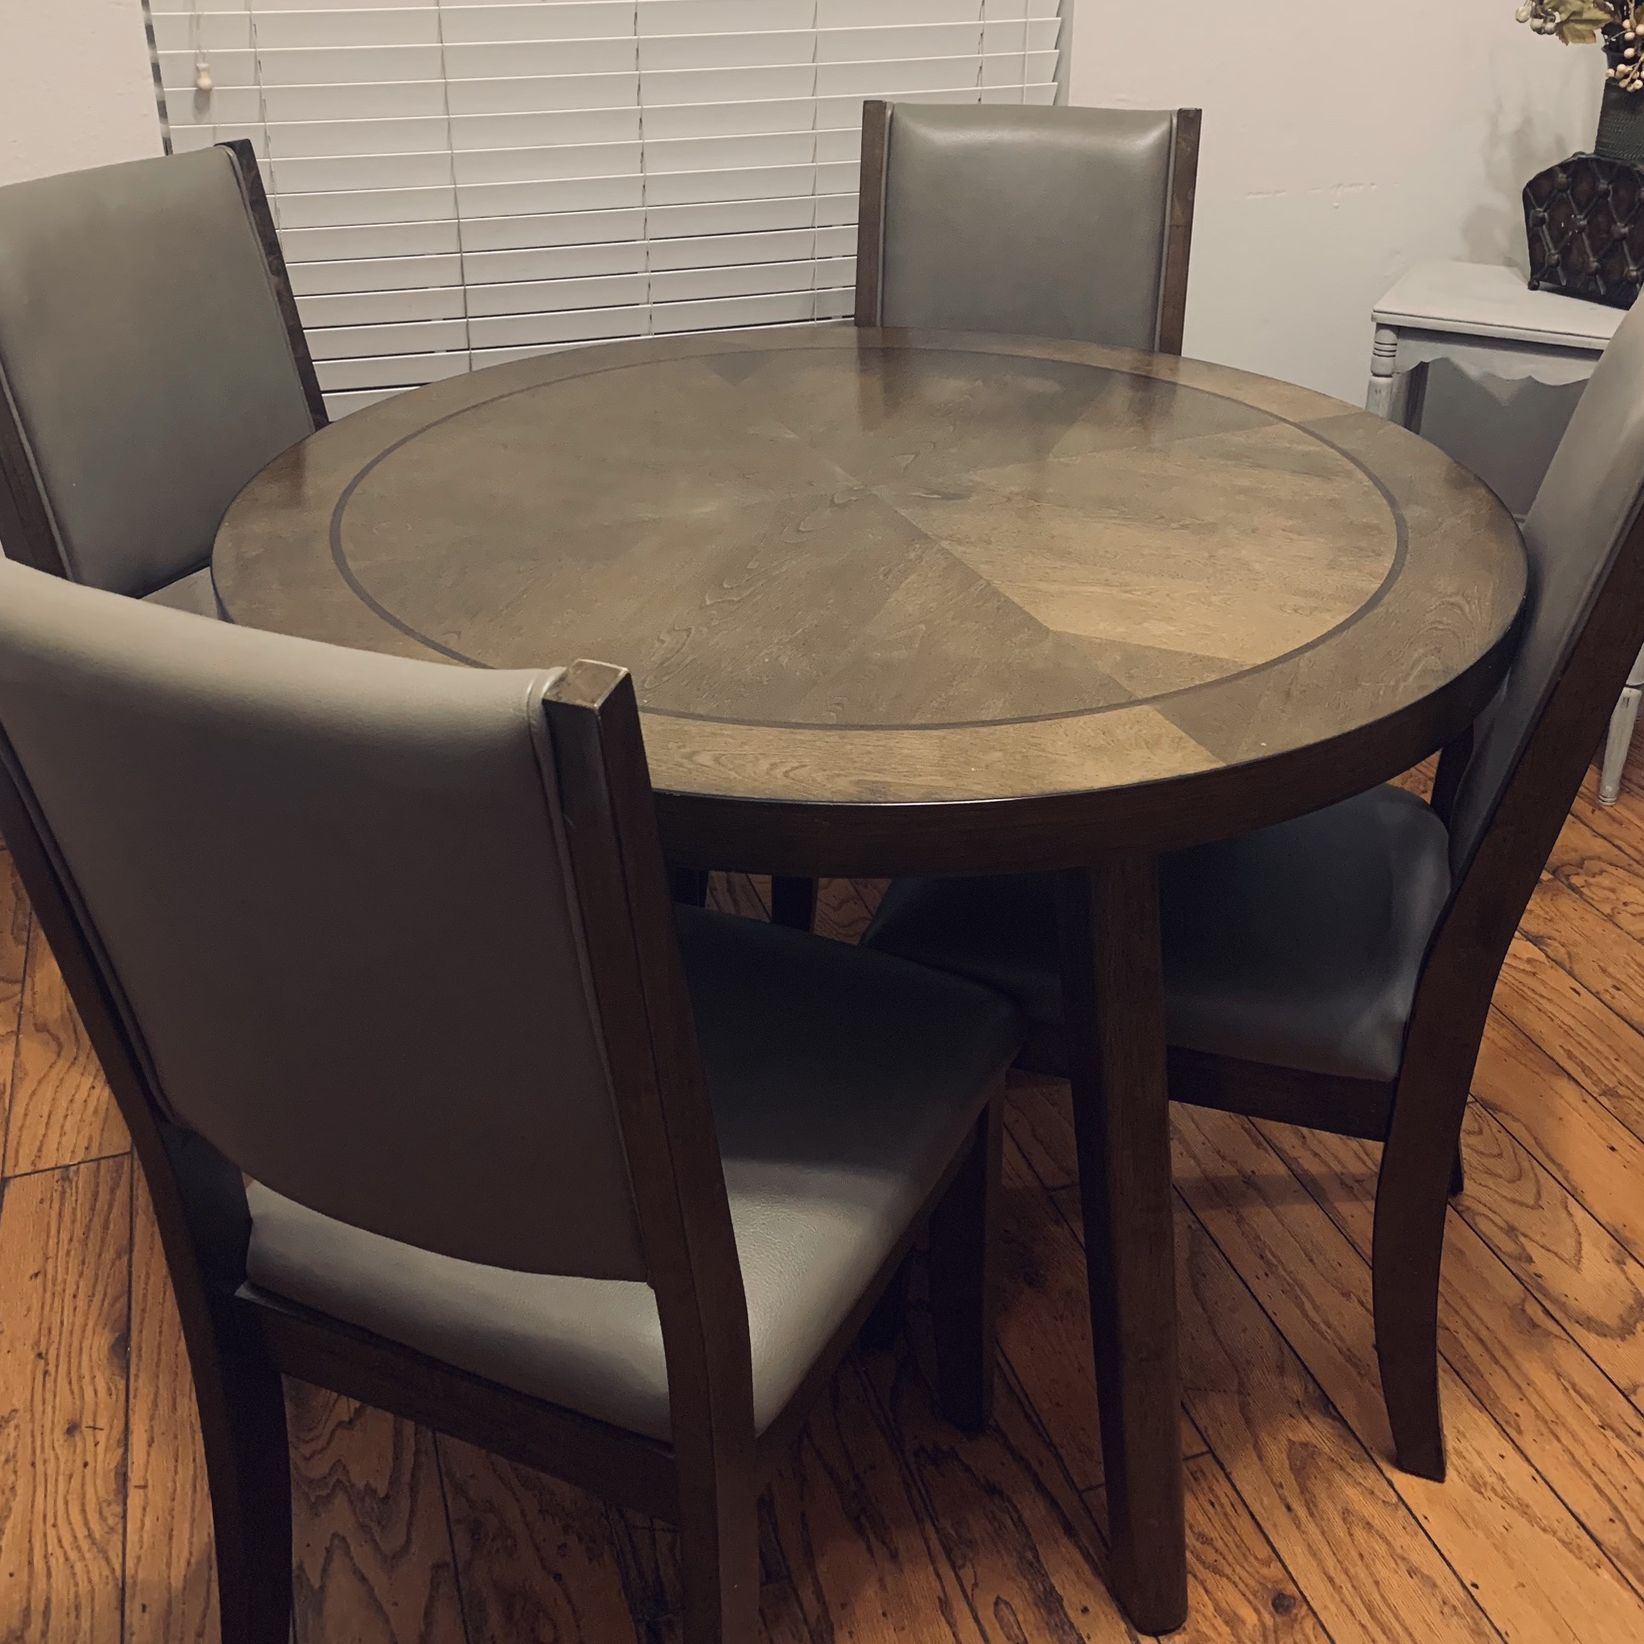 42” Round Kitchen Table With 4 Chairs